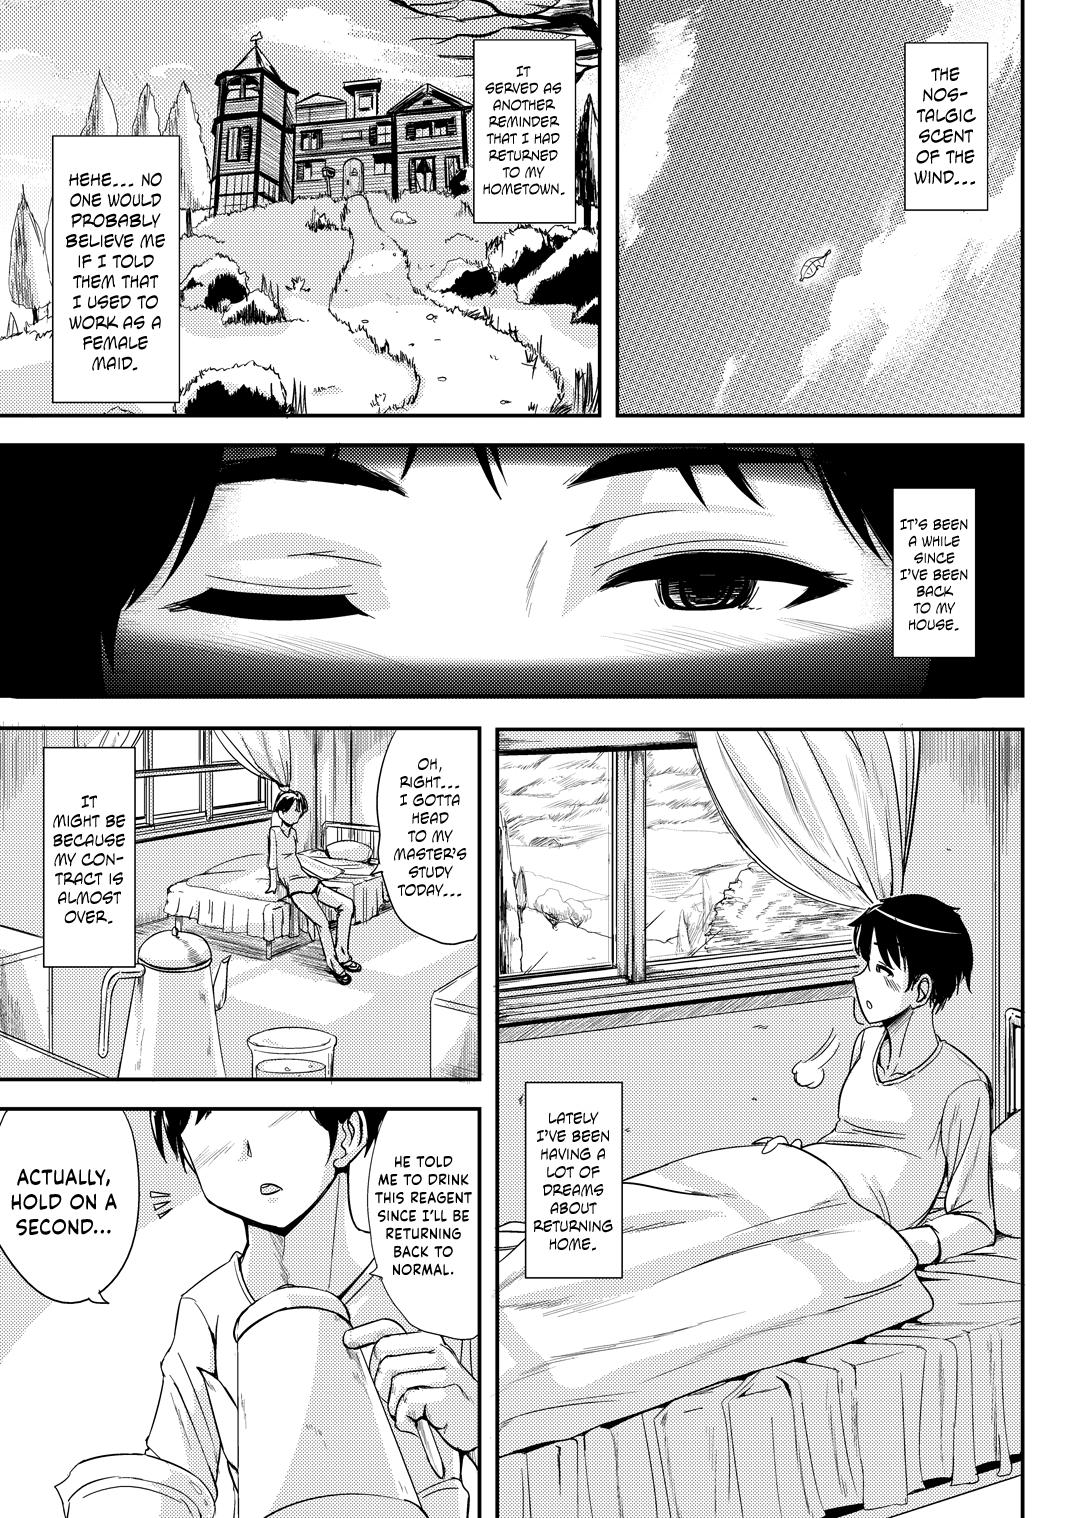 Foursome Trans “B” Maid Friend - Page 2